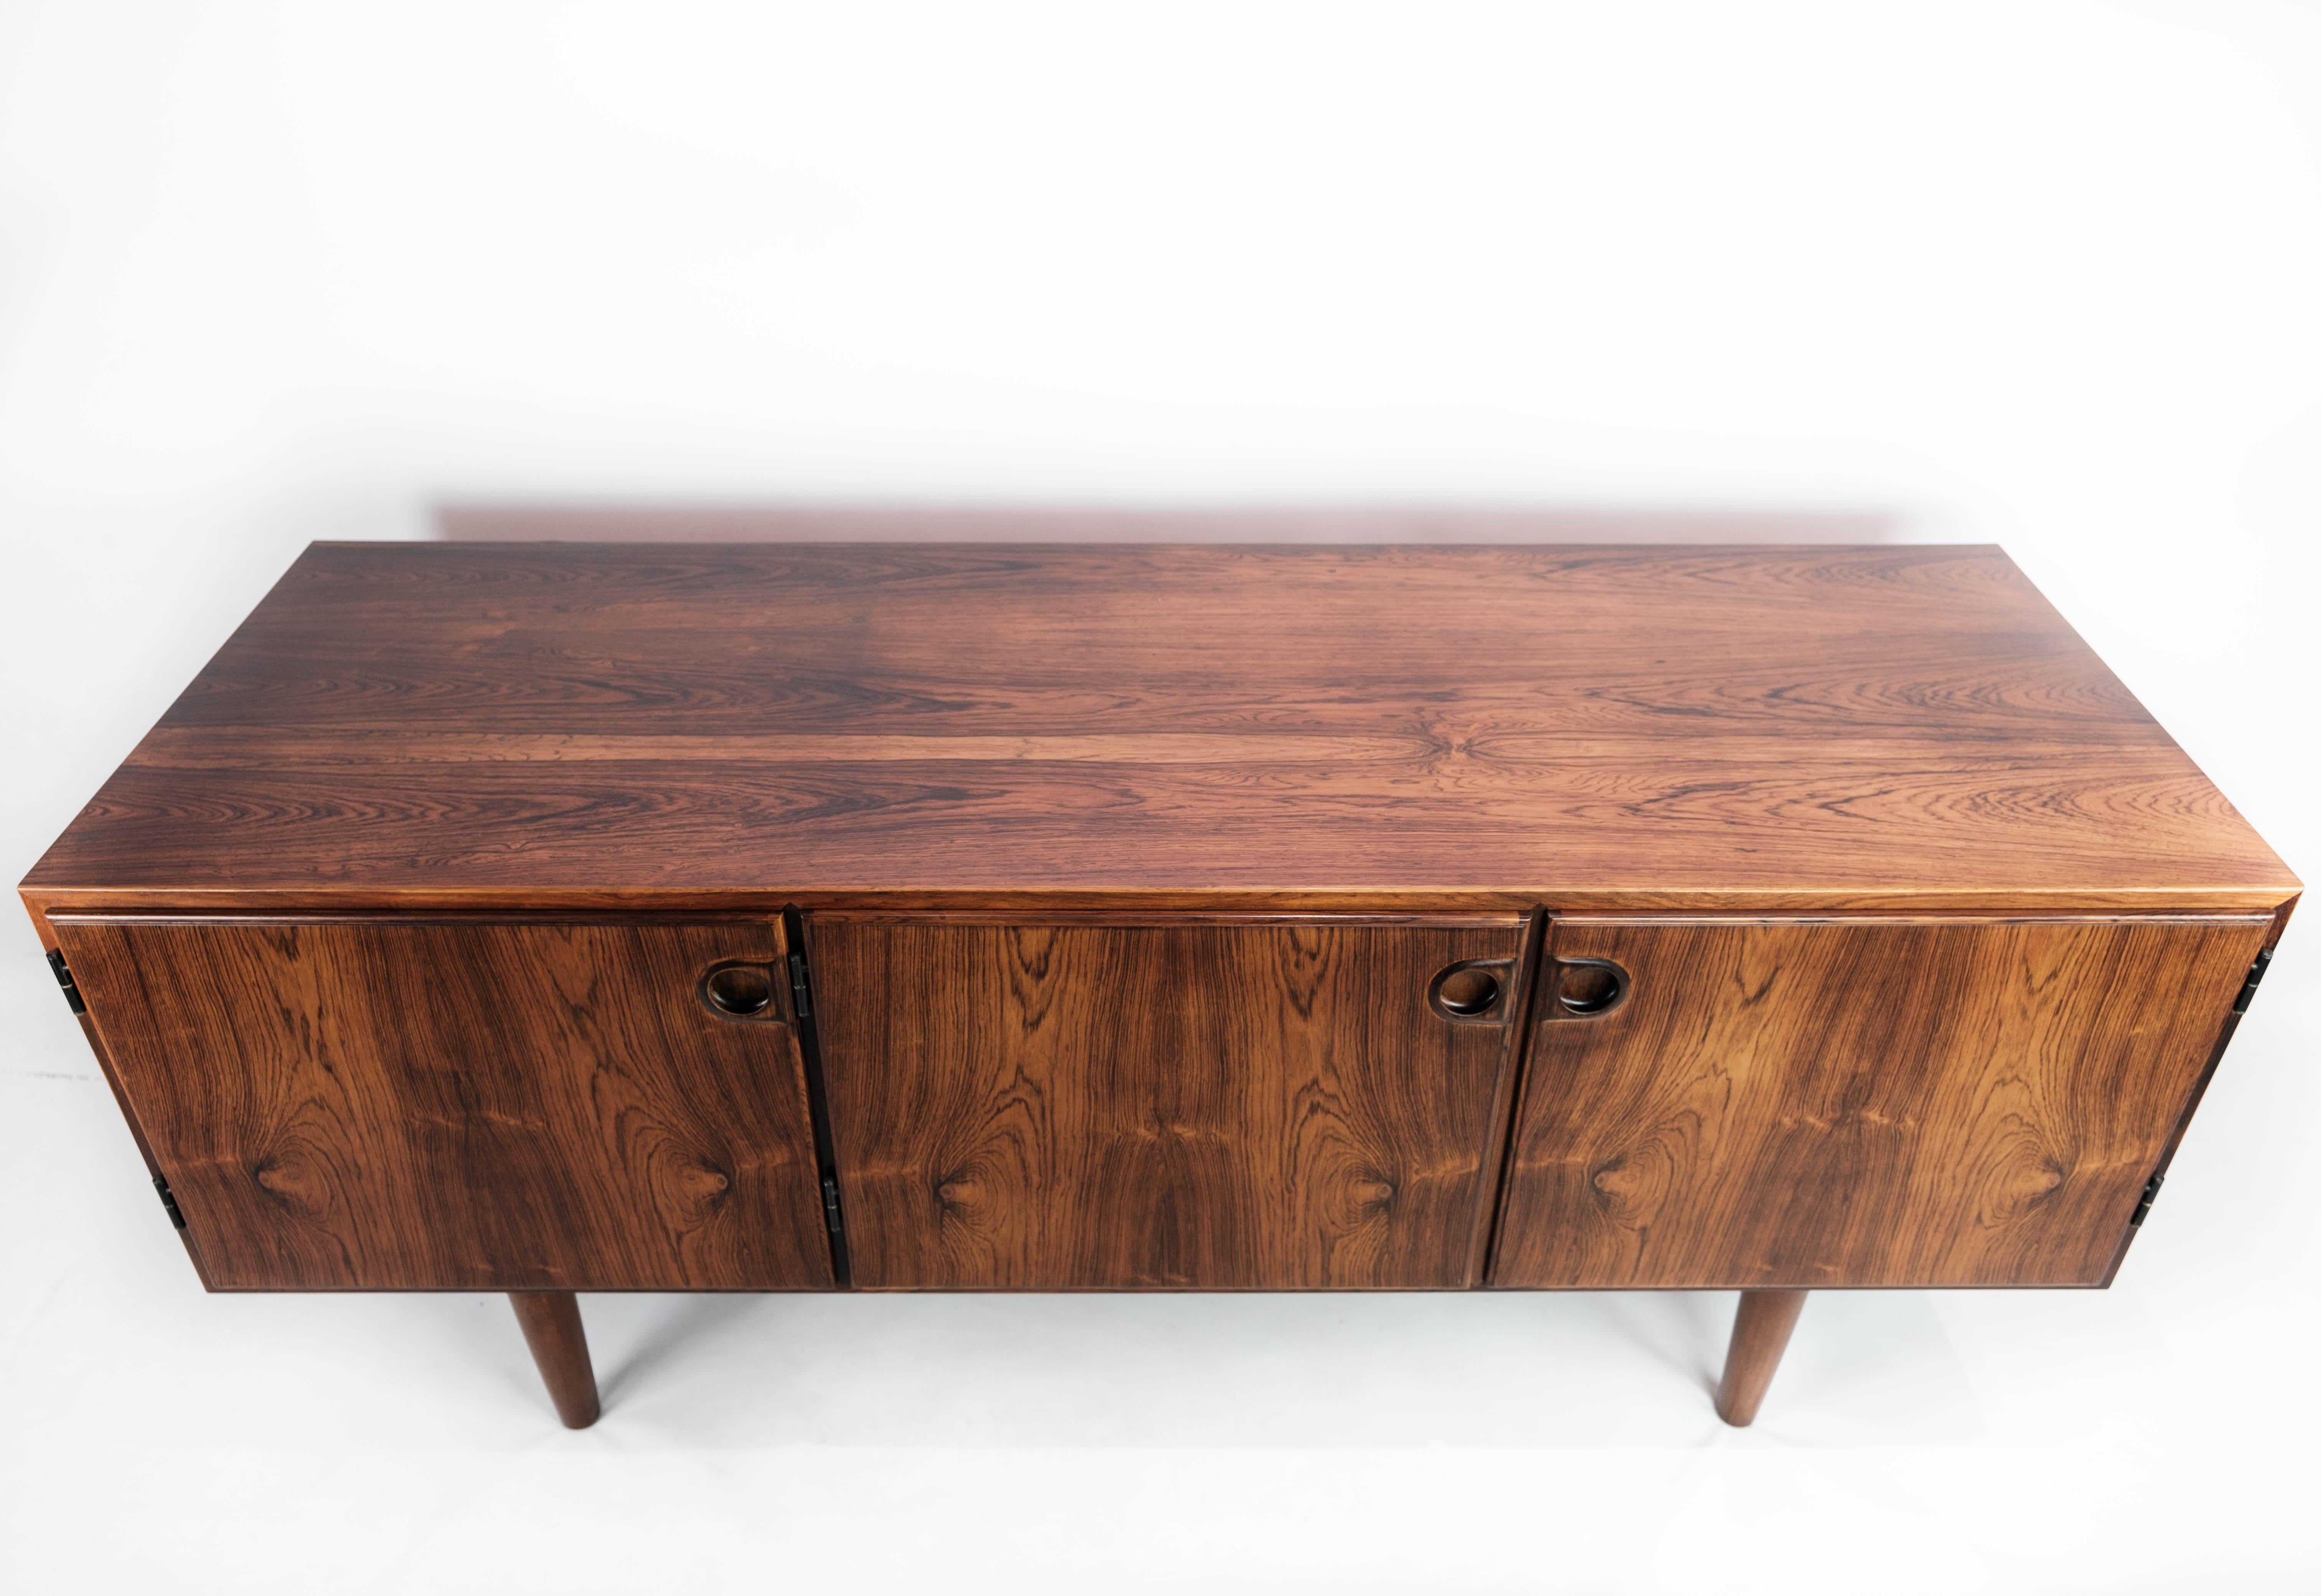 Sideboard in rosewood of Danish design from the 1960s. The item is in great vintage condition.